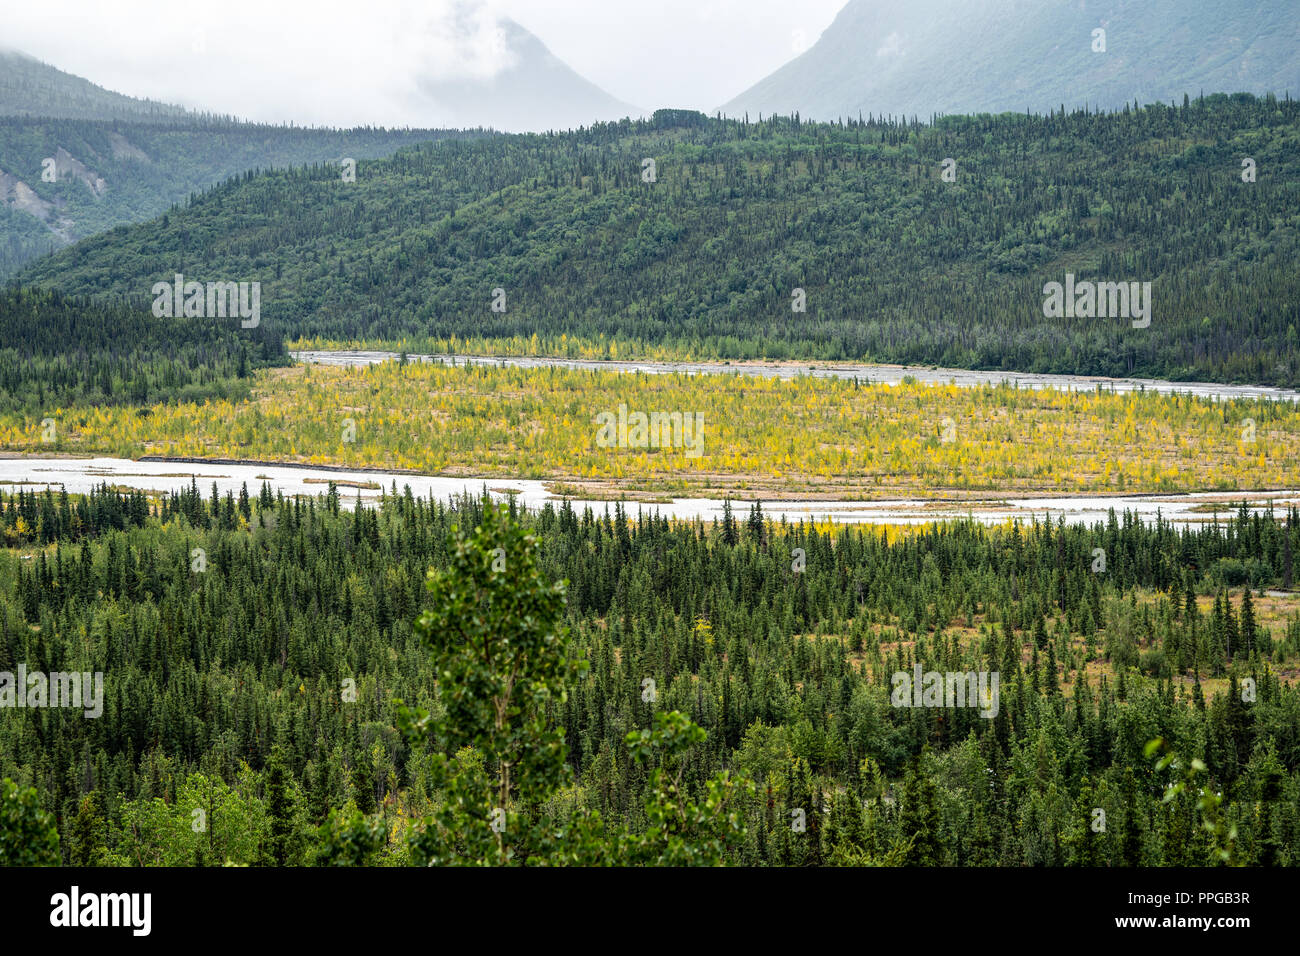 View of the Mantanuska River from the Mantanuska glacier area. Beautiful fall colors in the boreal forest Stock Photo